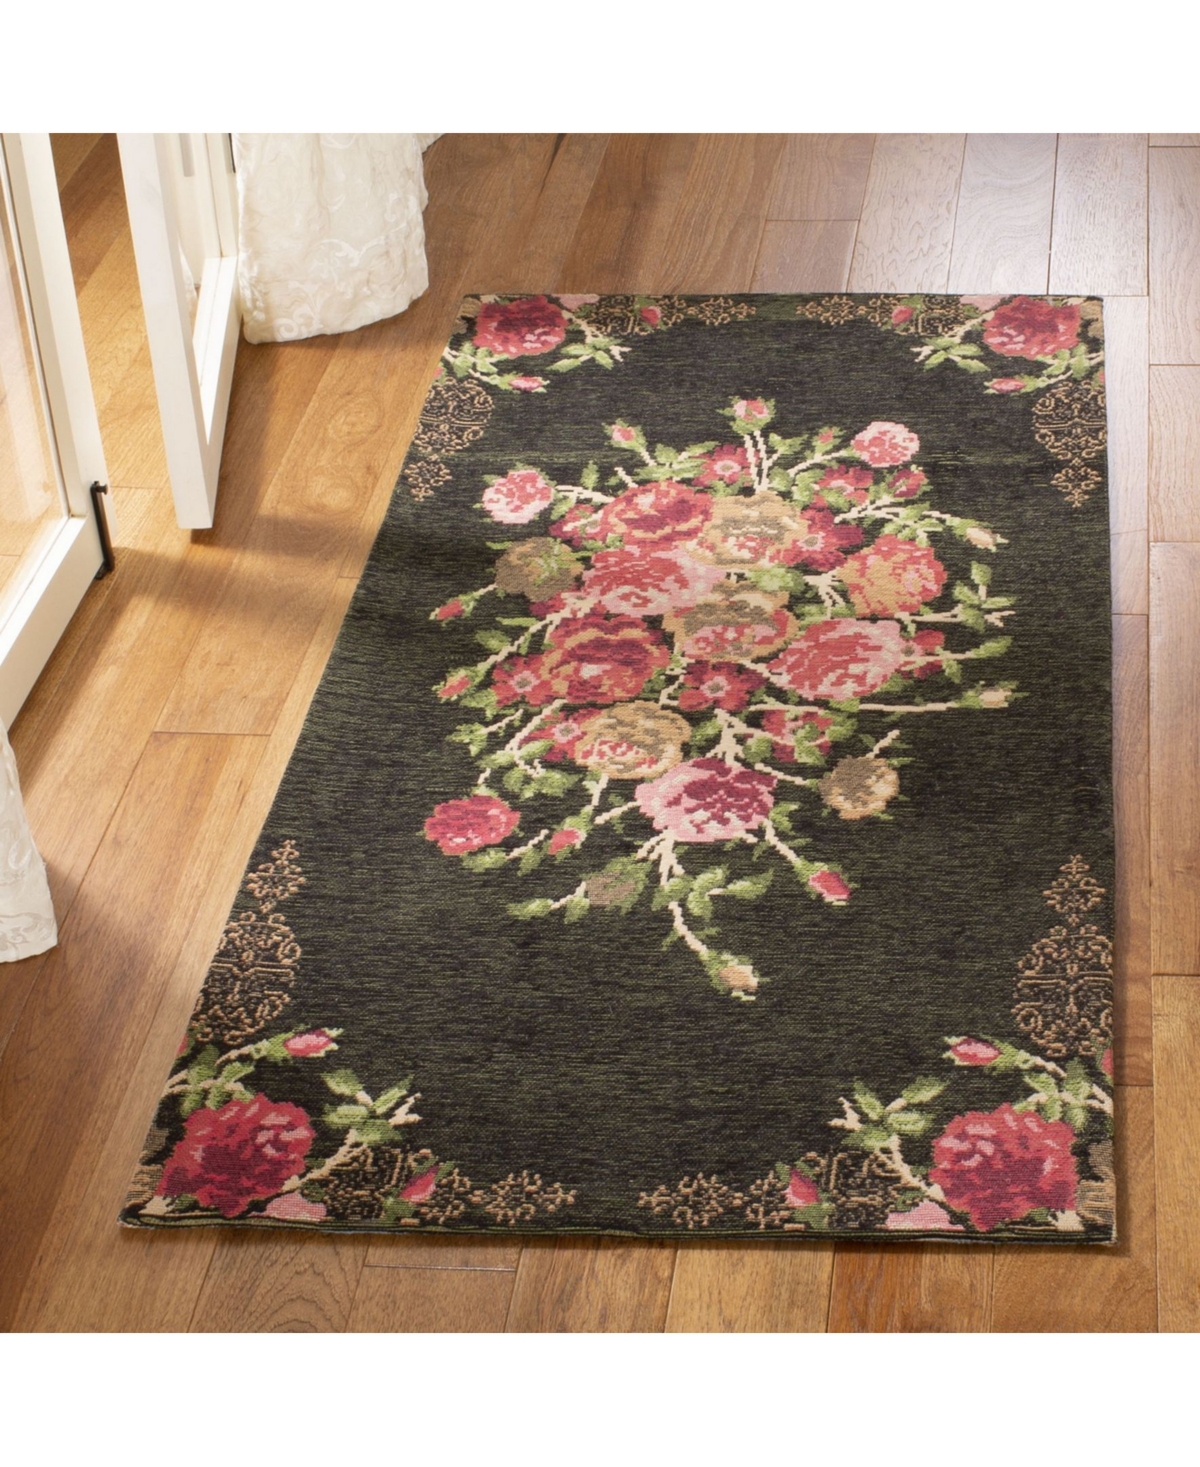 Safavieh Classic Vintage Clv115 Black And Red 5' X 8' Area Rug